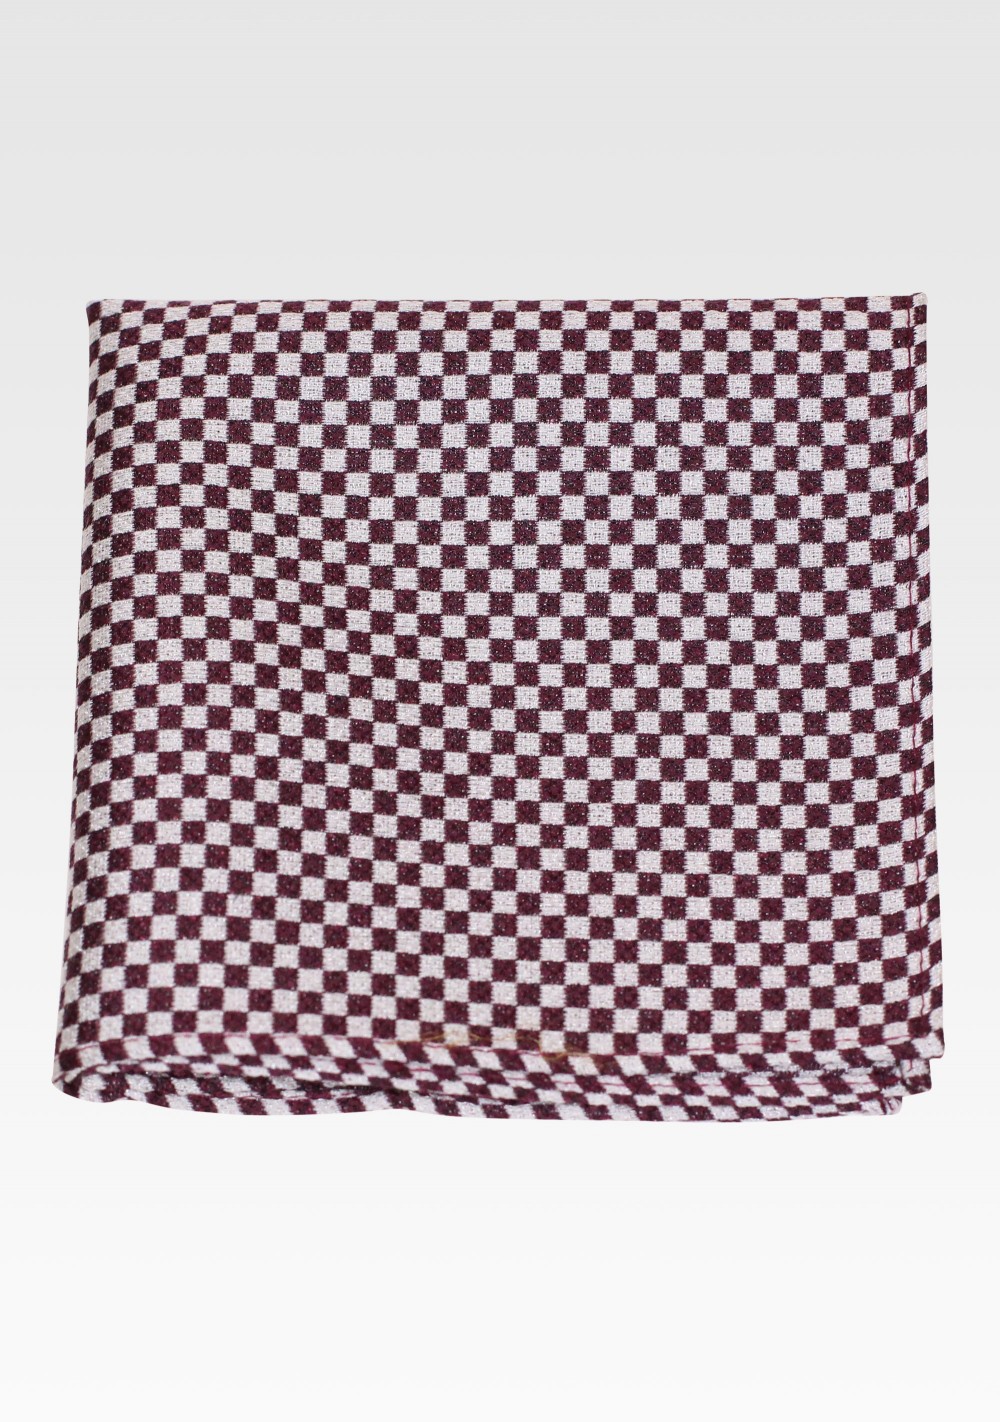 Microcheck Silk Hanky in Burgundy and Silver